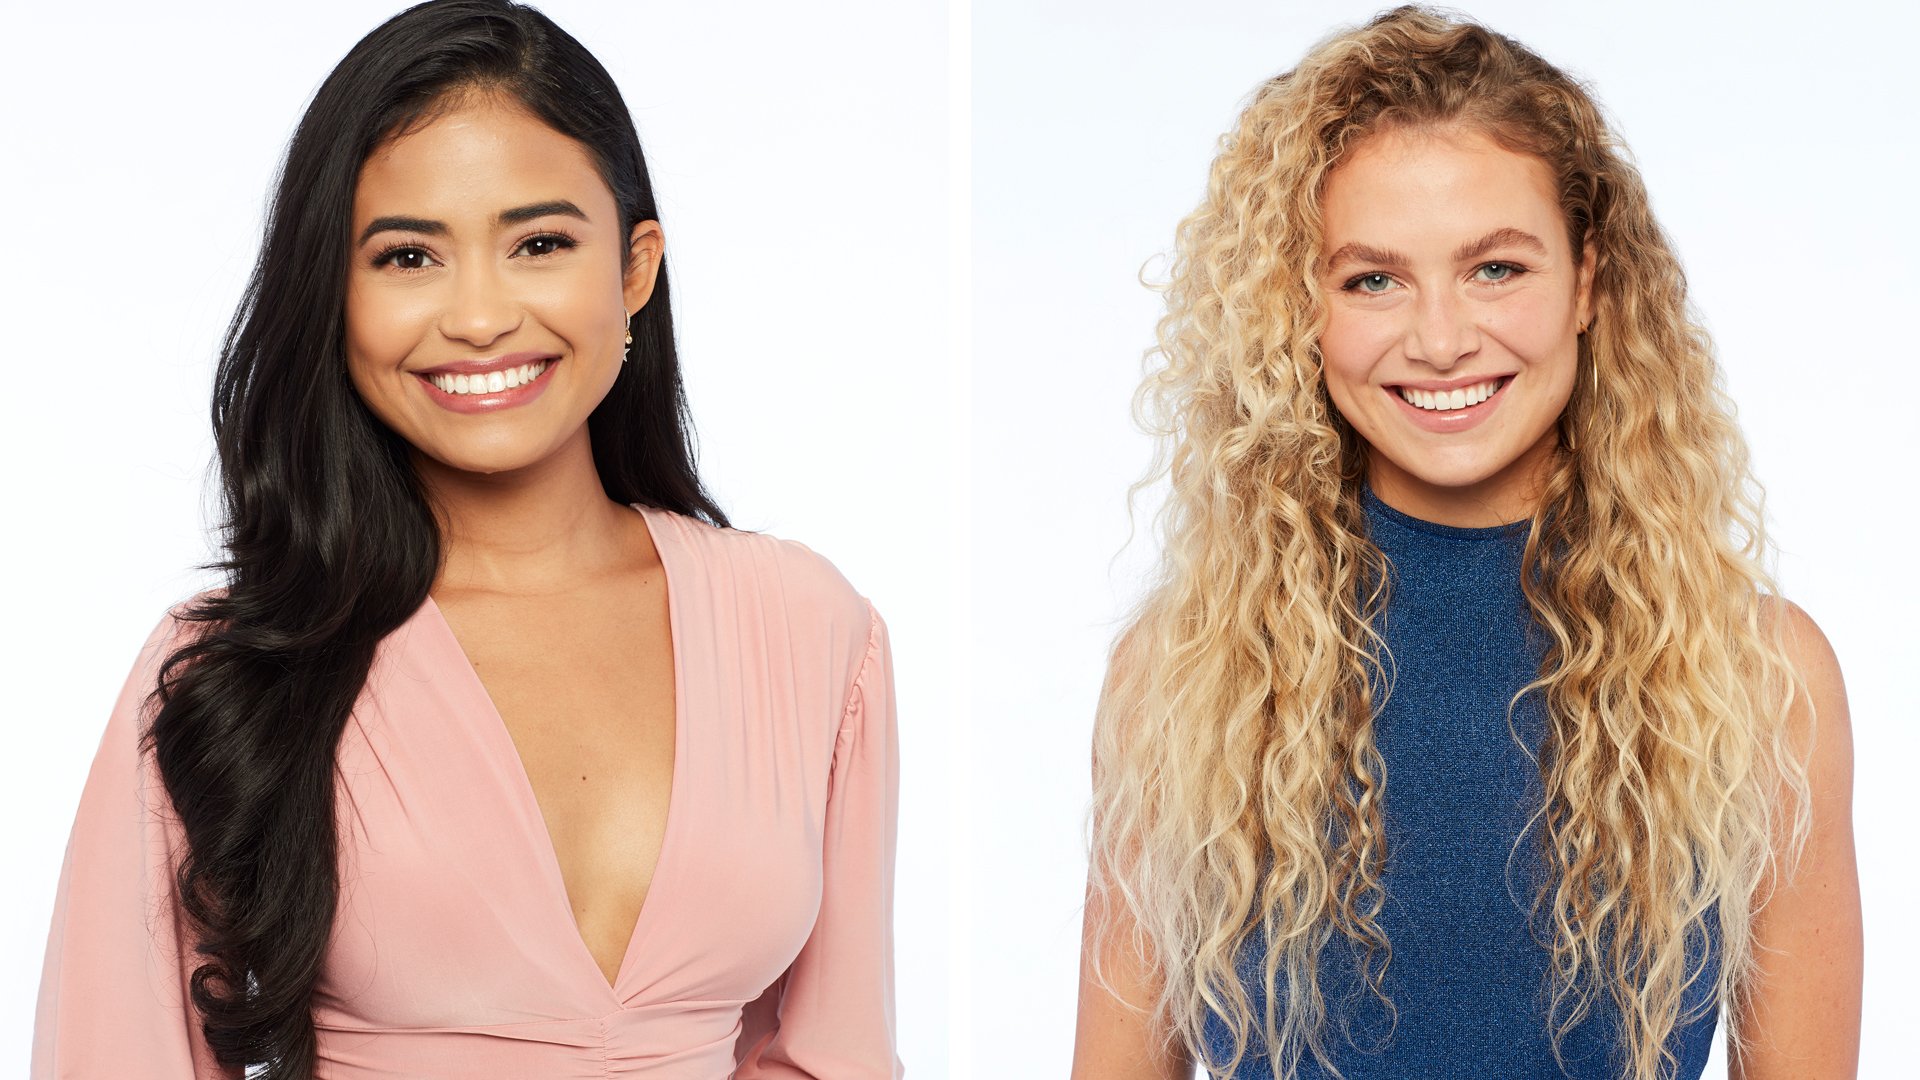 Jessenia Cruz and MJ Snyder from 'The Bachelor' Season 25 with Matt James in 2021